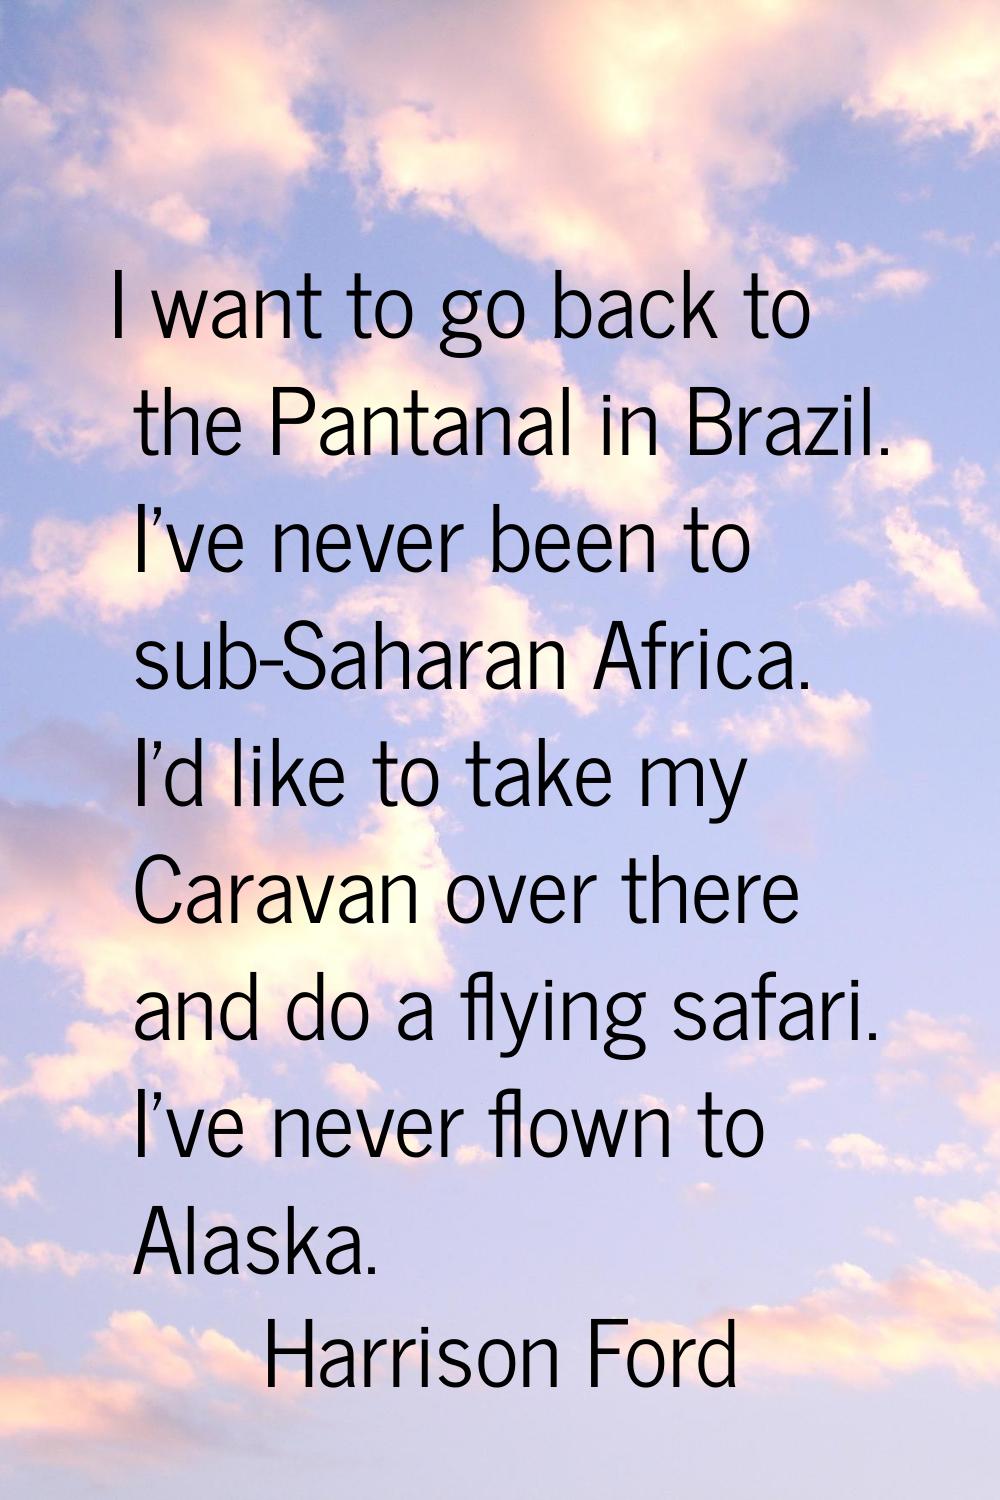 I want to go back to the Pantanal in Brazil. I've never been to sub-Saharan Africa. I'd like to tak